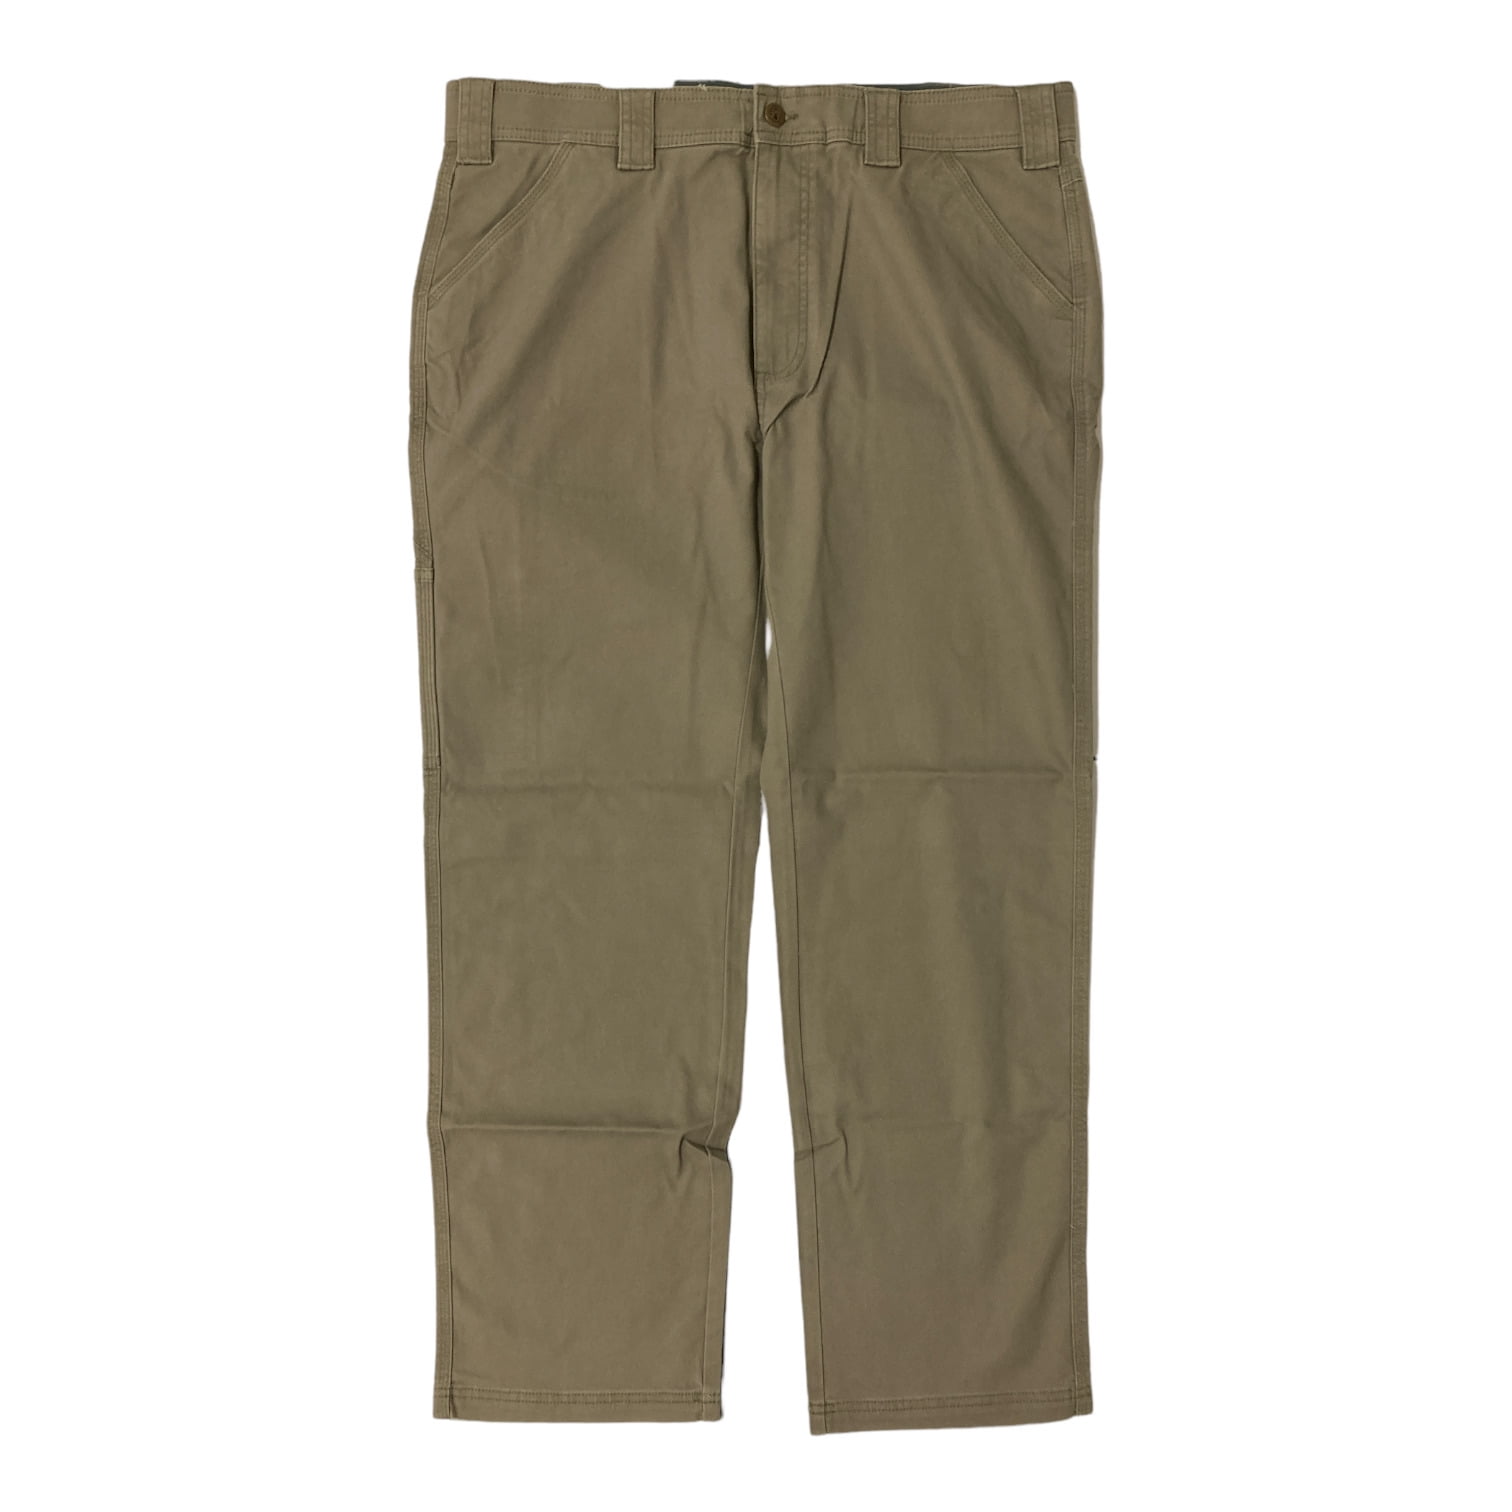 Coleman Men's Canvas Stretch Utility Work Pants in Bay Leaf, Size